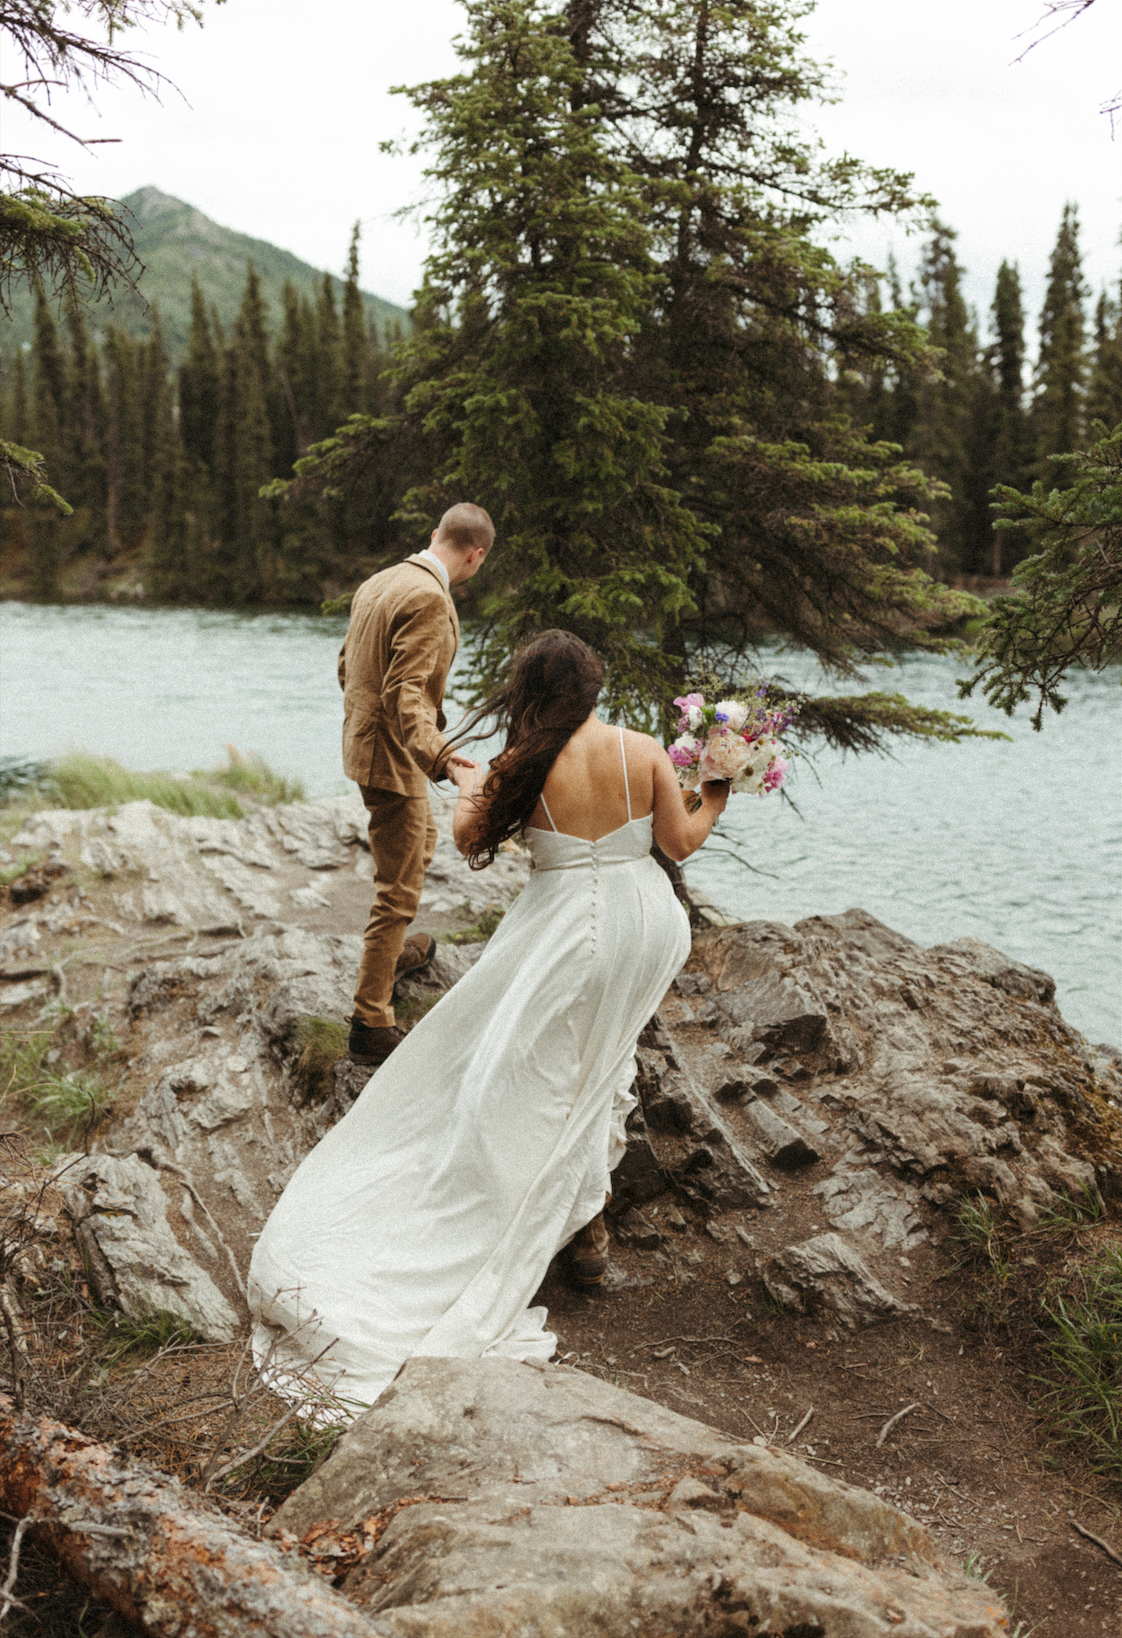 Groom helping bride onto a rock during their elopement in Denali National Park